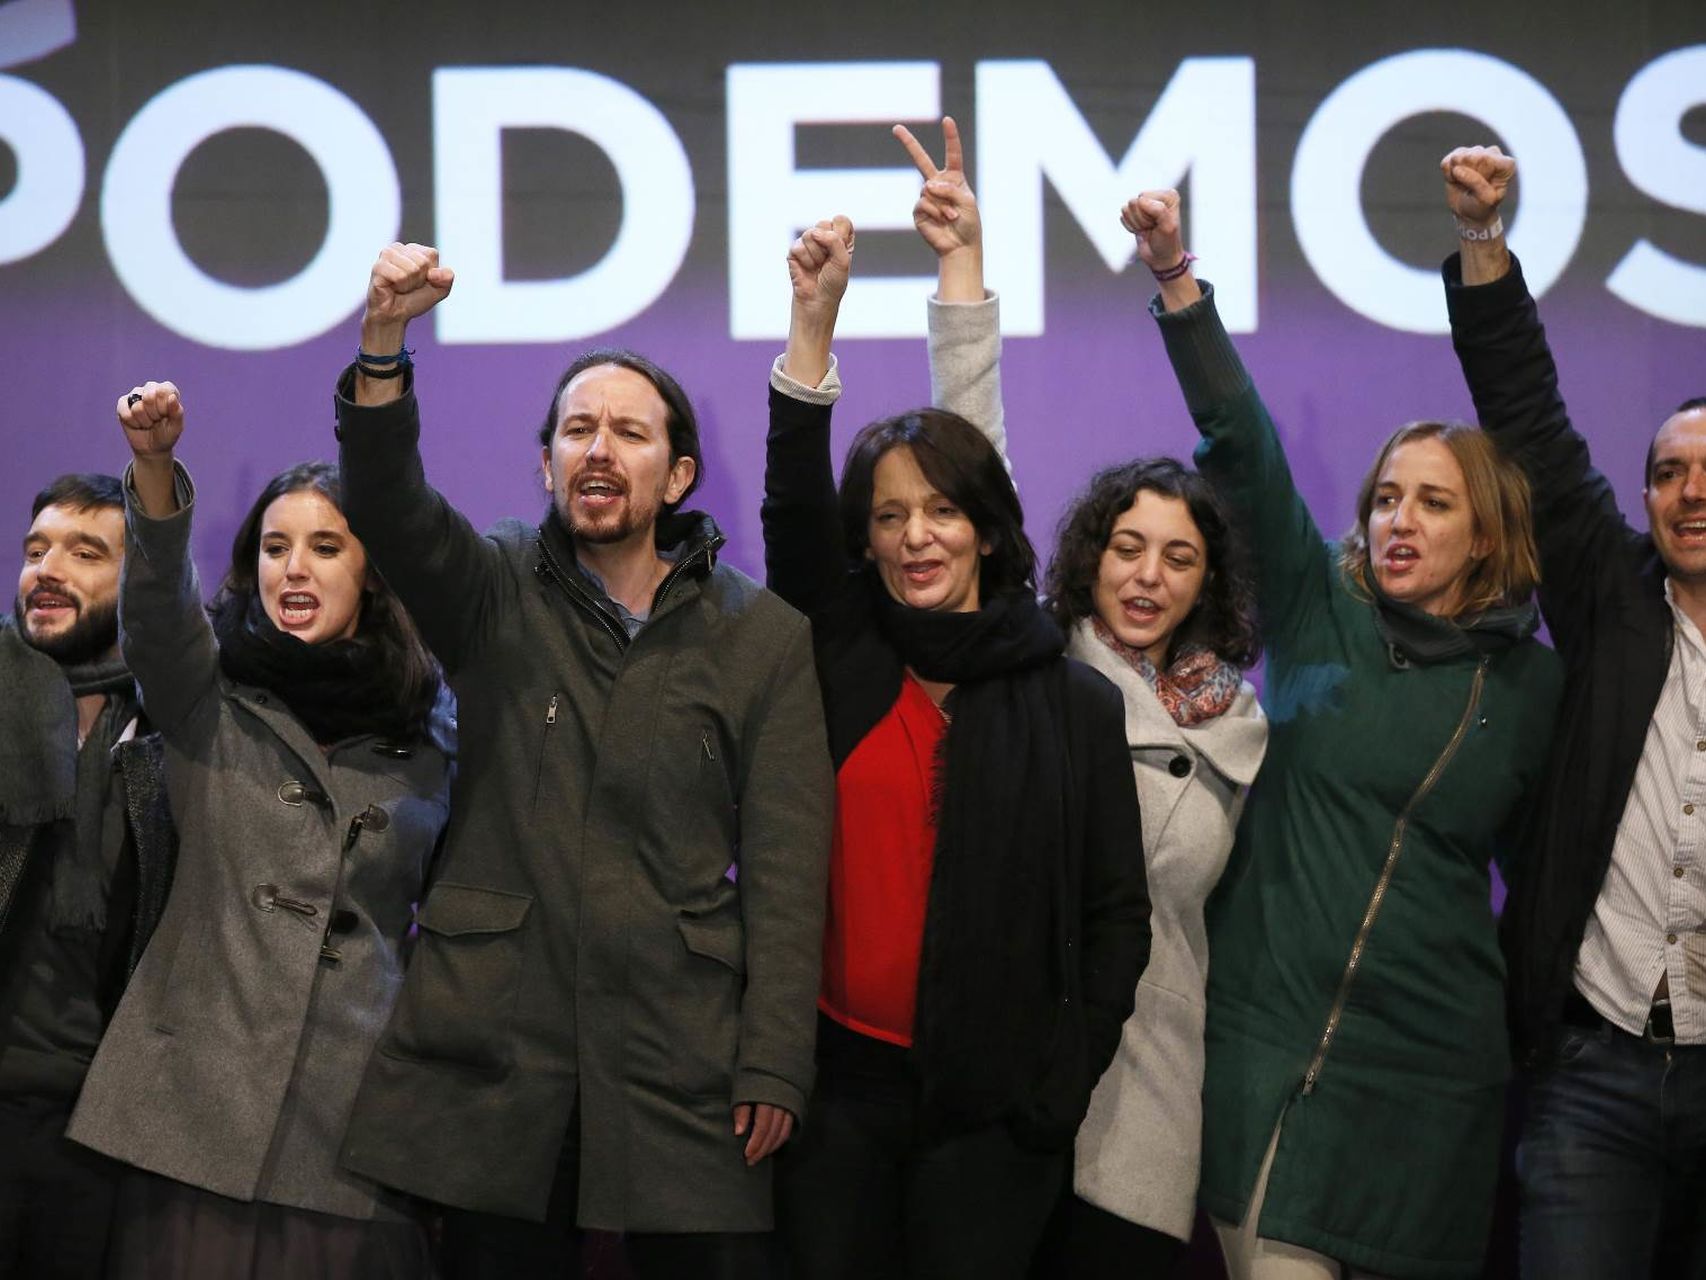 Spain’s Podemos mulish insistence on anti-Moroccan blunders